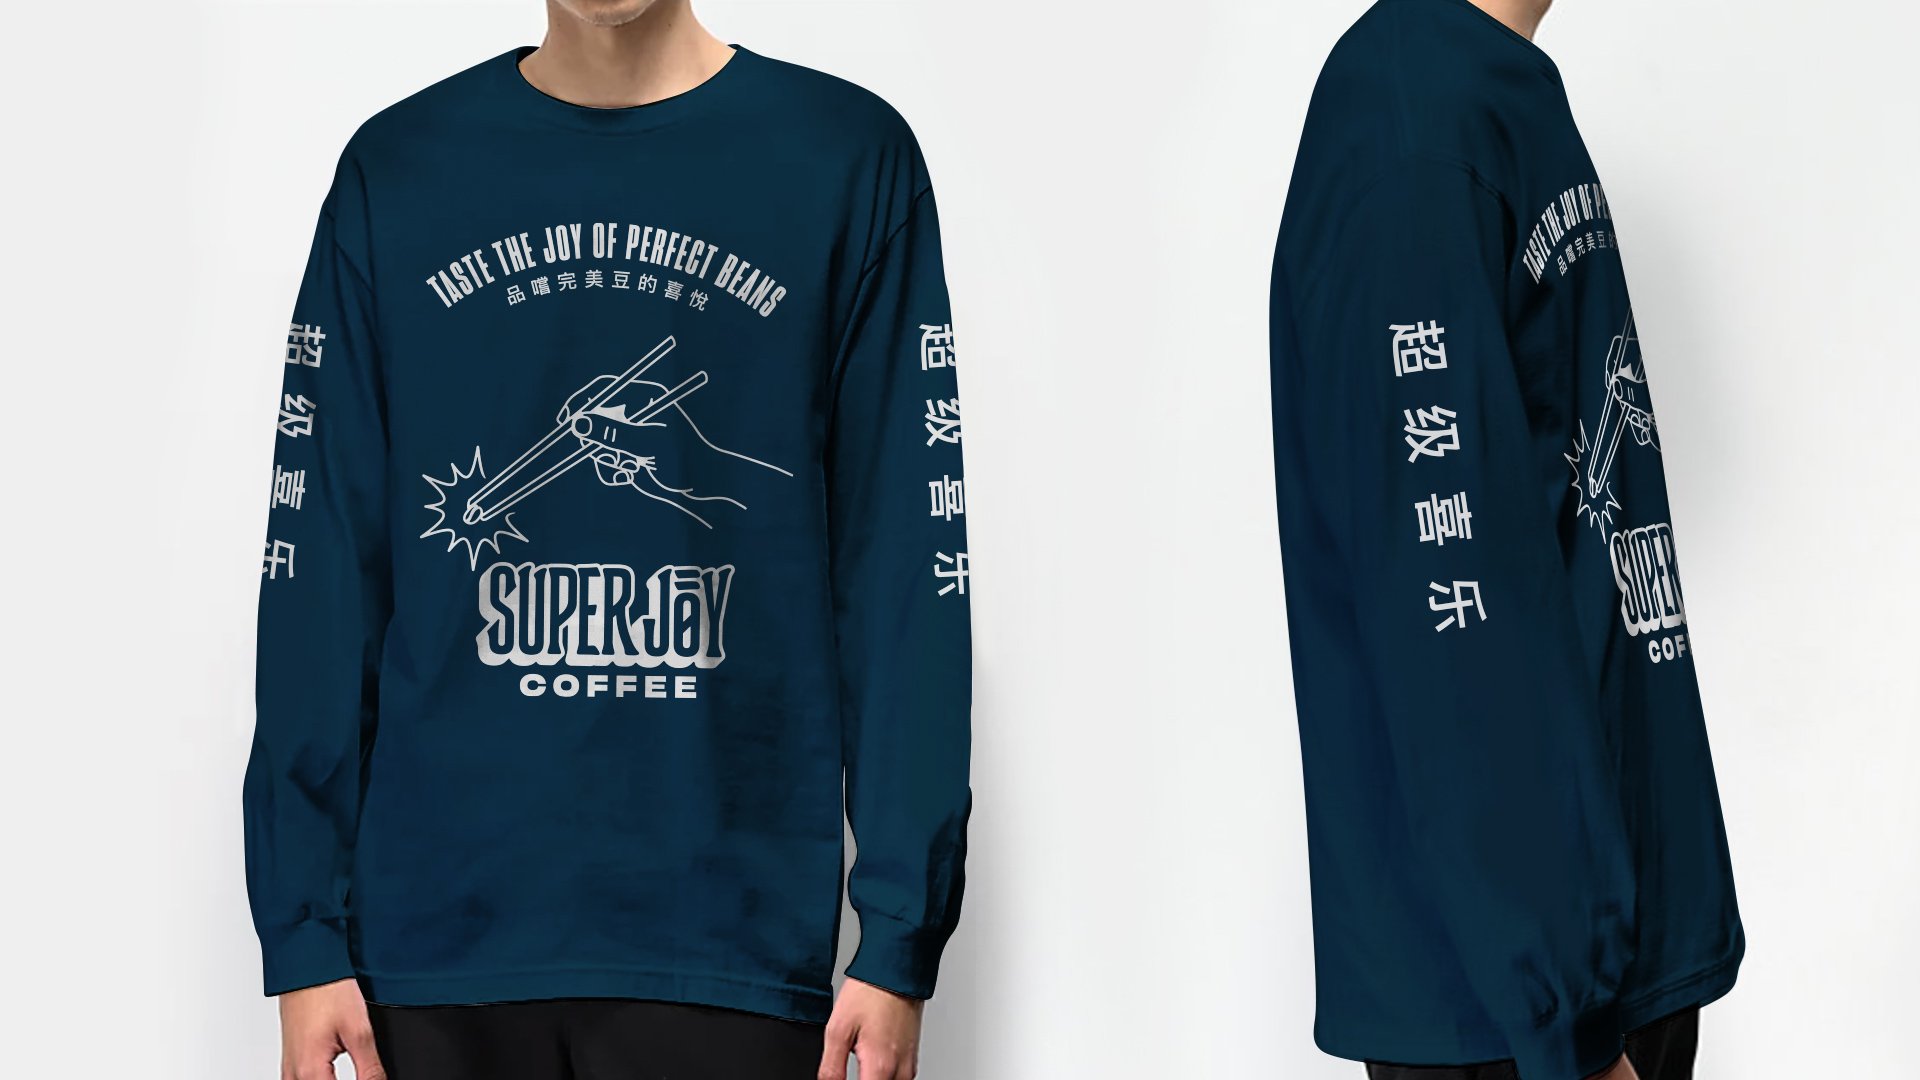 A person wears a long-sleeved navy Super Joy shirt. The front reads “Taste the joy of perfect beans” with Chinese characters and a hand, chopsticks, and coffee bean. The sleeves also feature Chinese symbols.